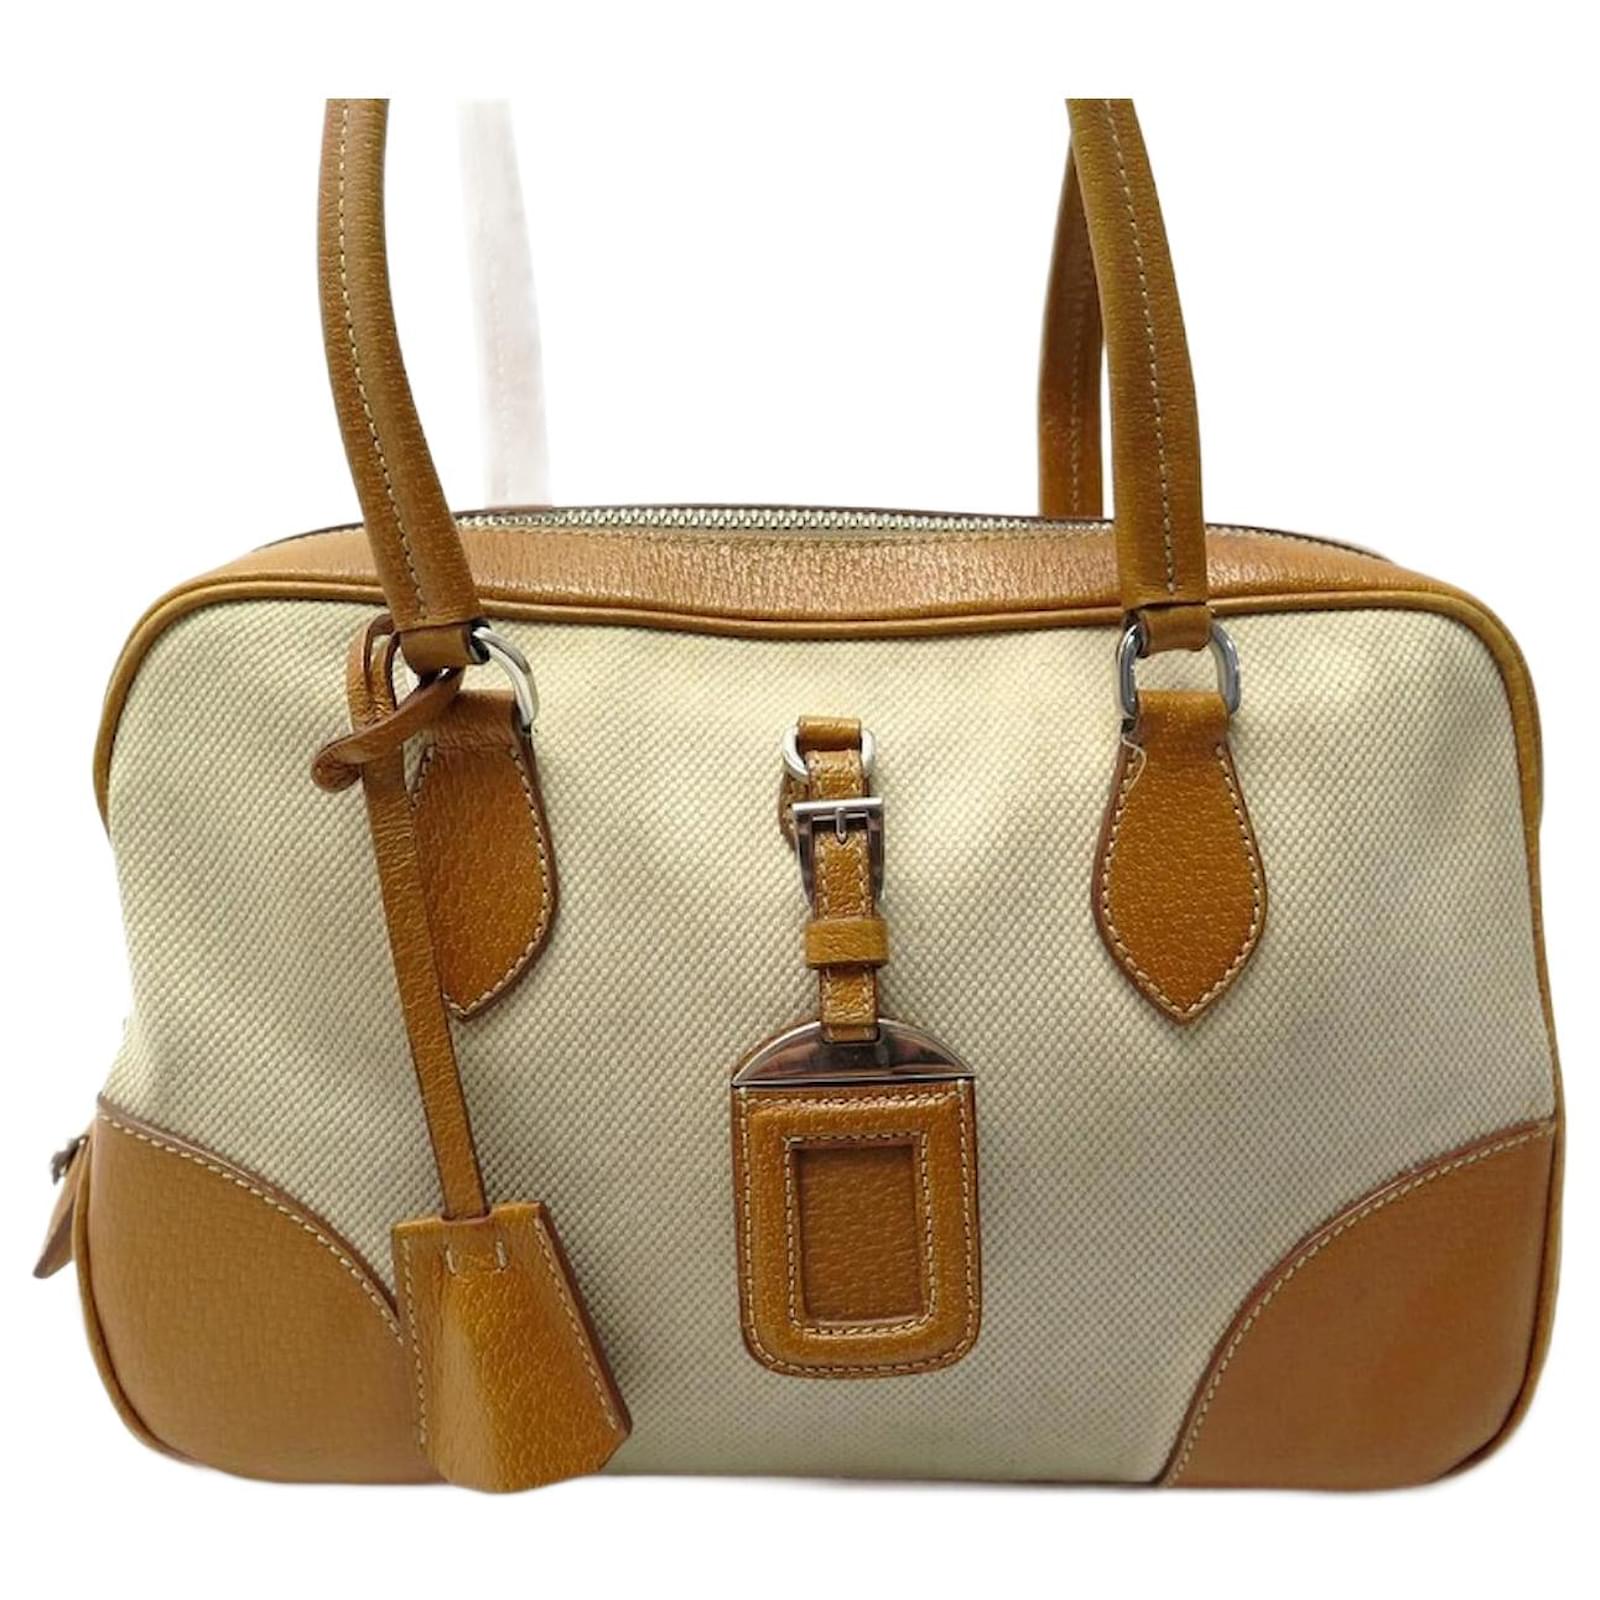 Prada Bauletto Leather Bowling Bag In Gold